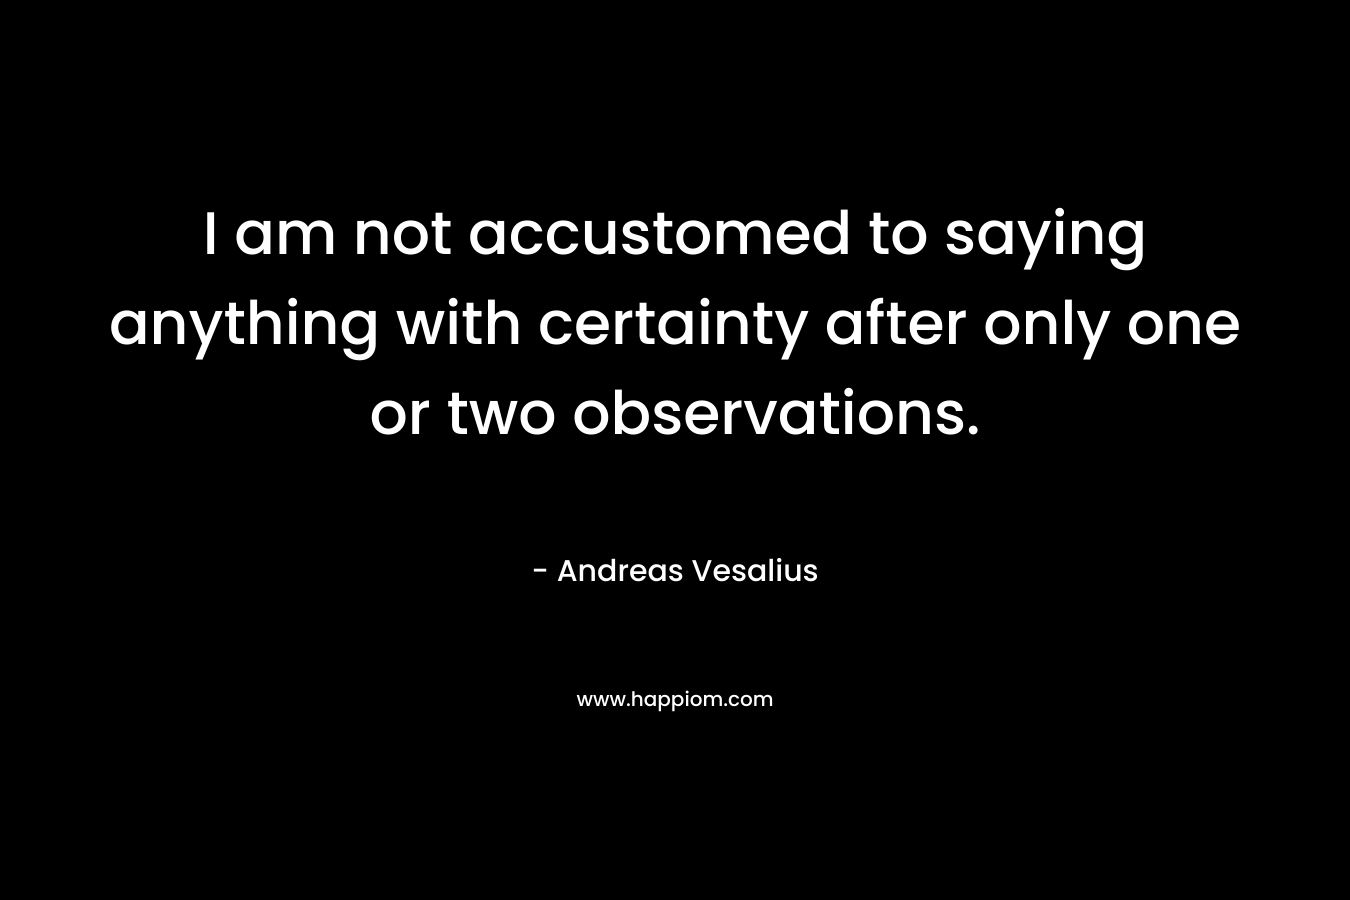 I am not accustomed to saying anything with certainty after only one or two observations. – Andreas Vesalius